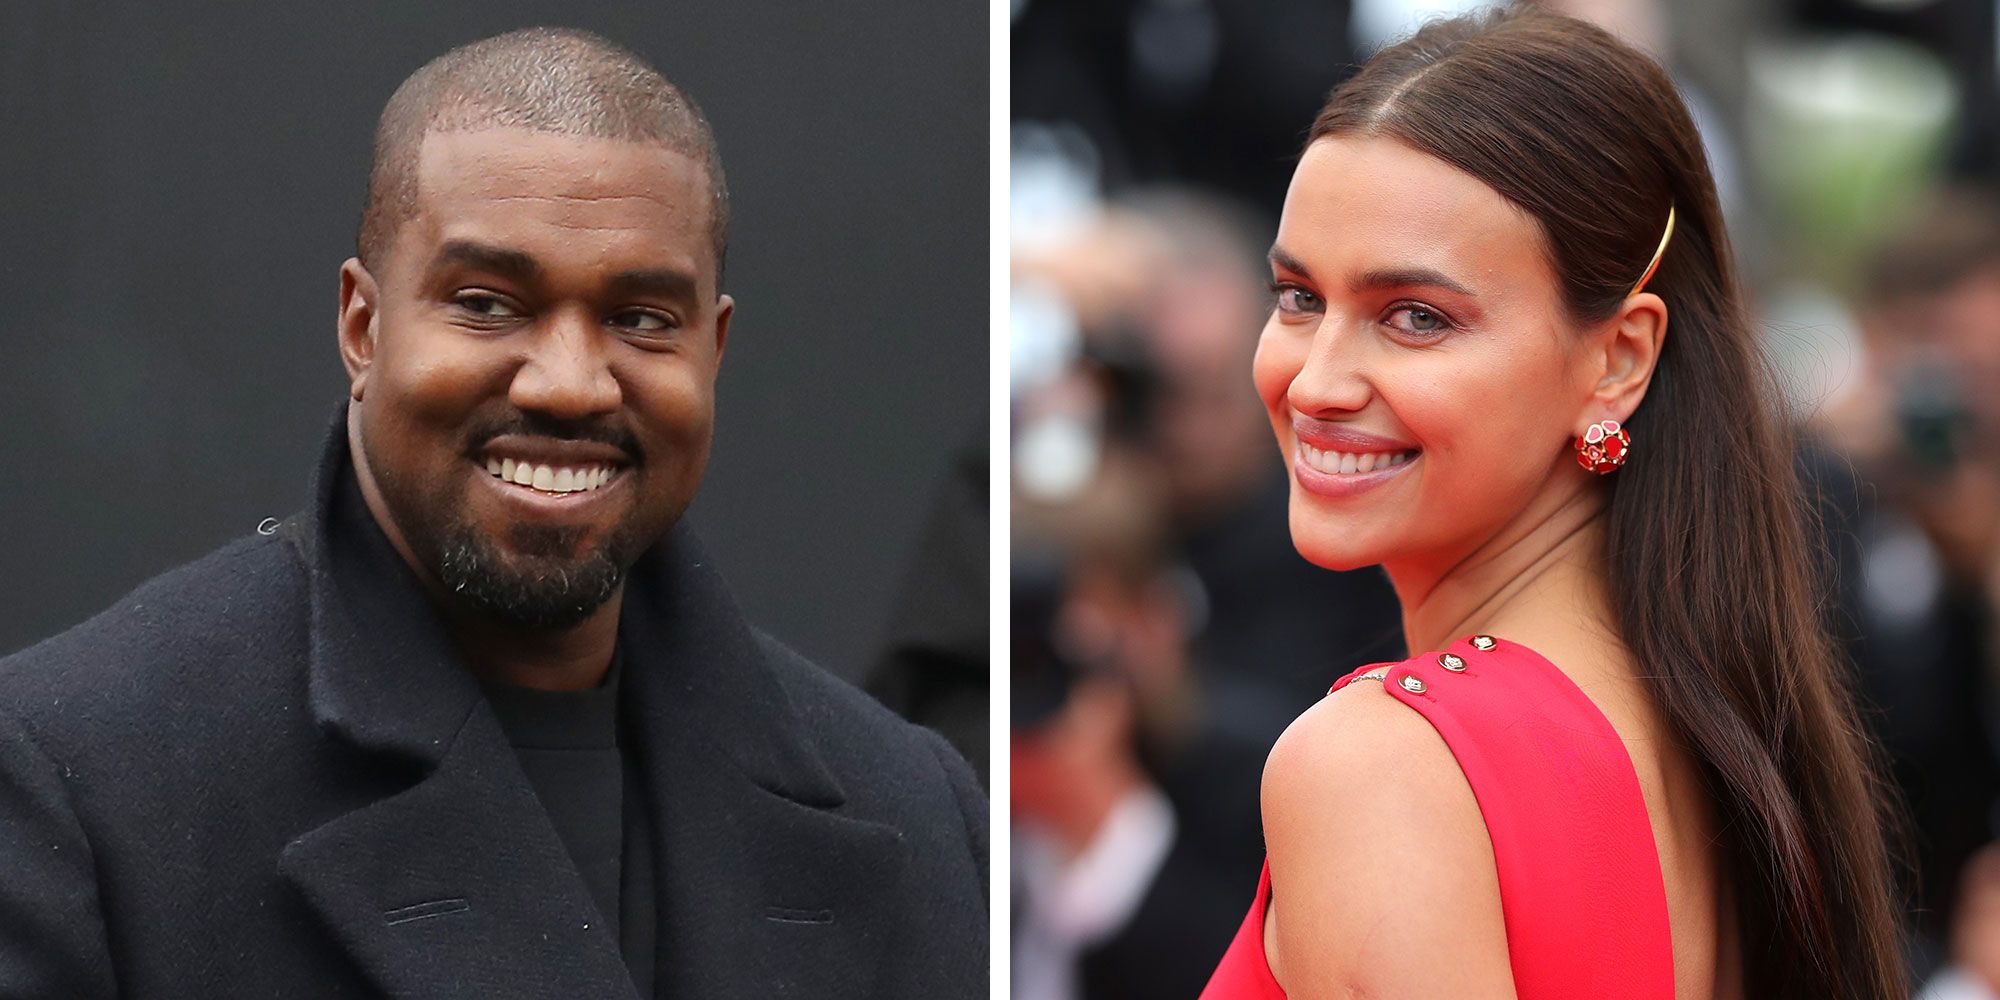 Kanye West Reportedly ‘Reached Out’ and Pursued Irina Shayk After Kim Kardashian Divorce